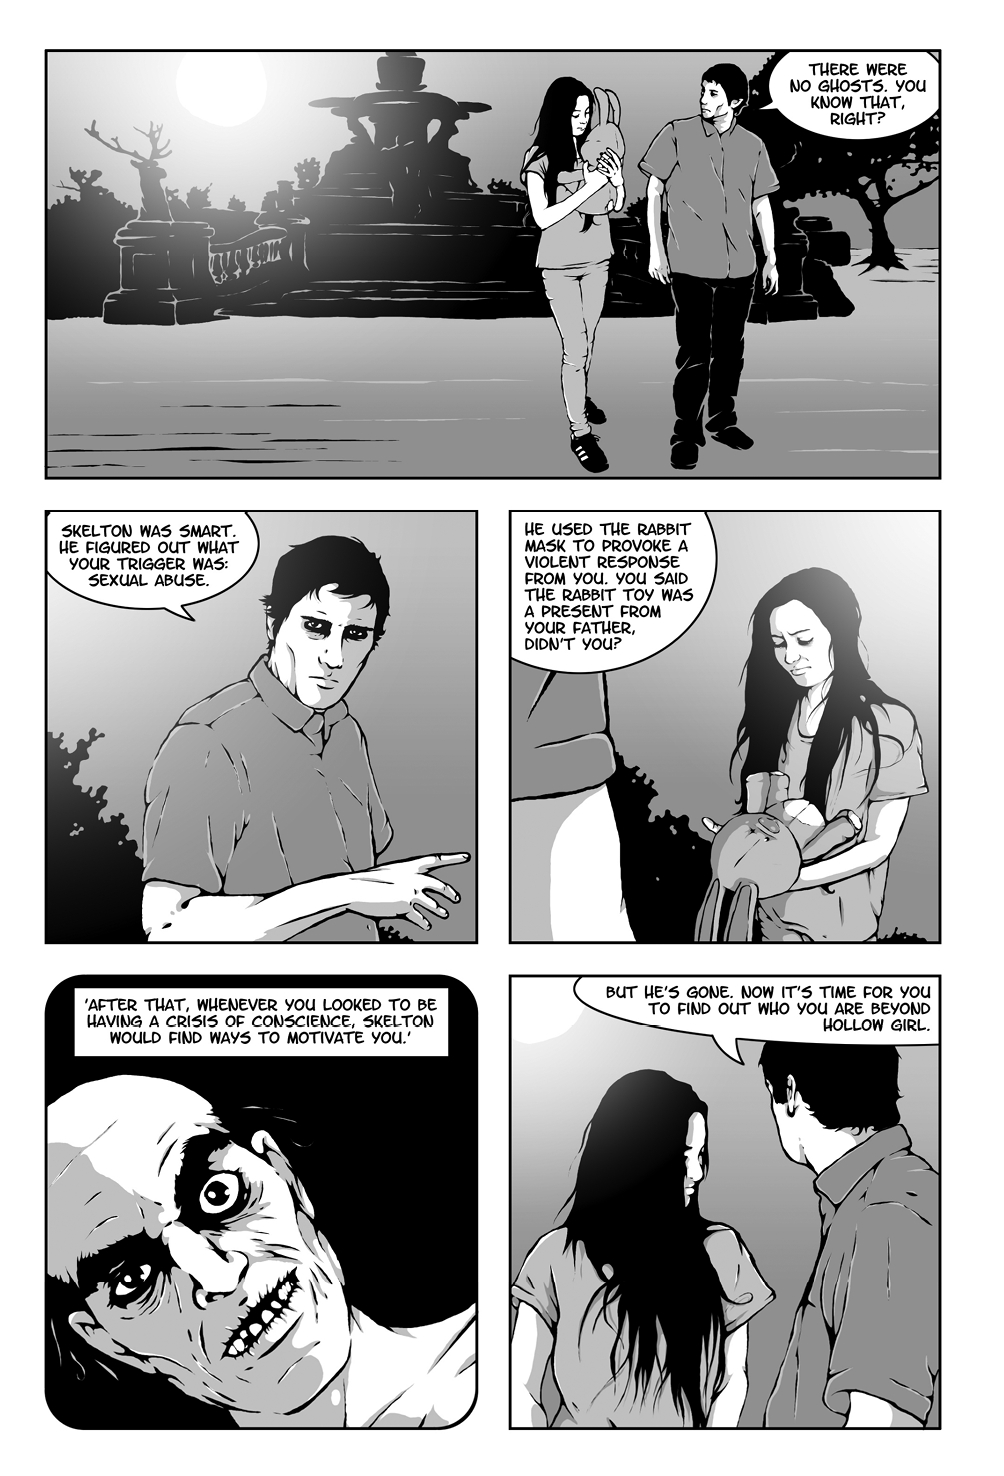 Read online Hollow Girl comic -  Issue #3 - 26